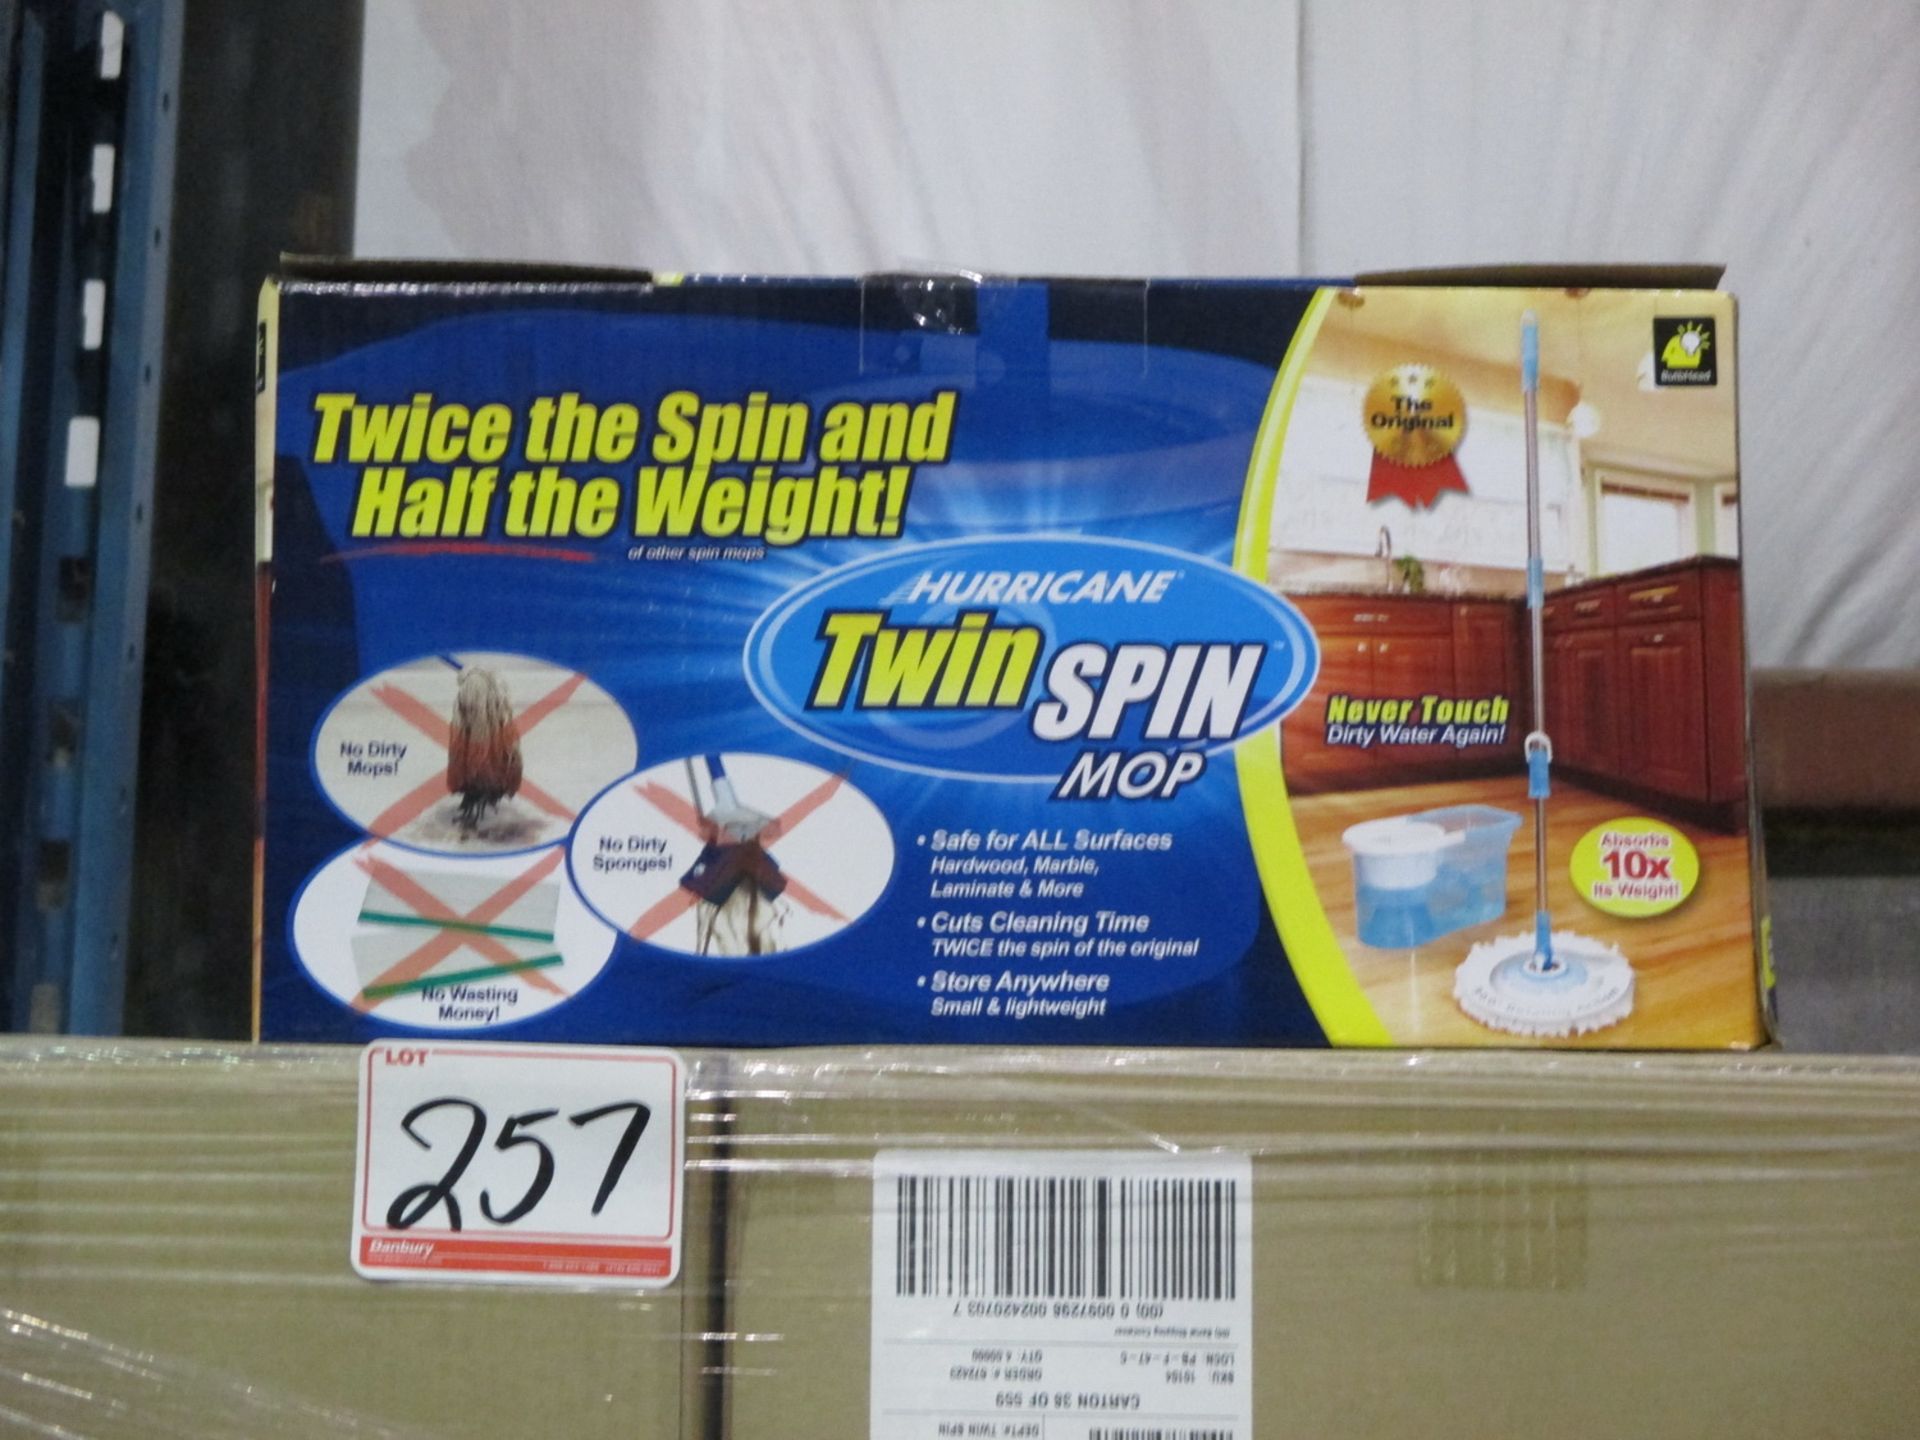 PIECES - HURRICANE TWIN SPIN MOPS (4 PCS/BOX - 16 BOXES)